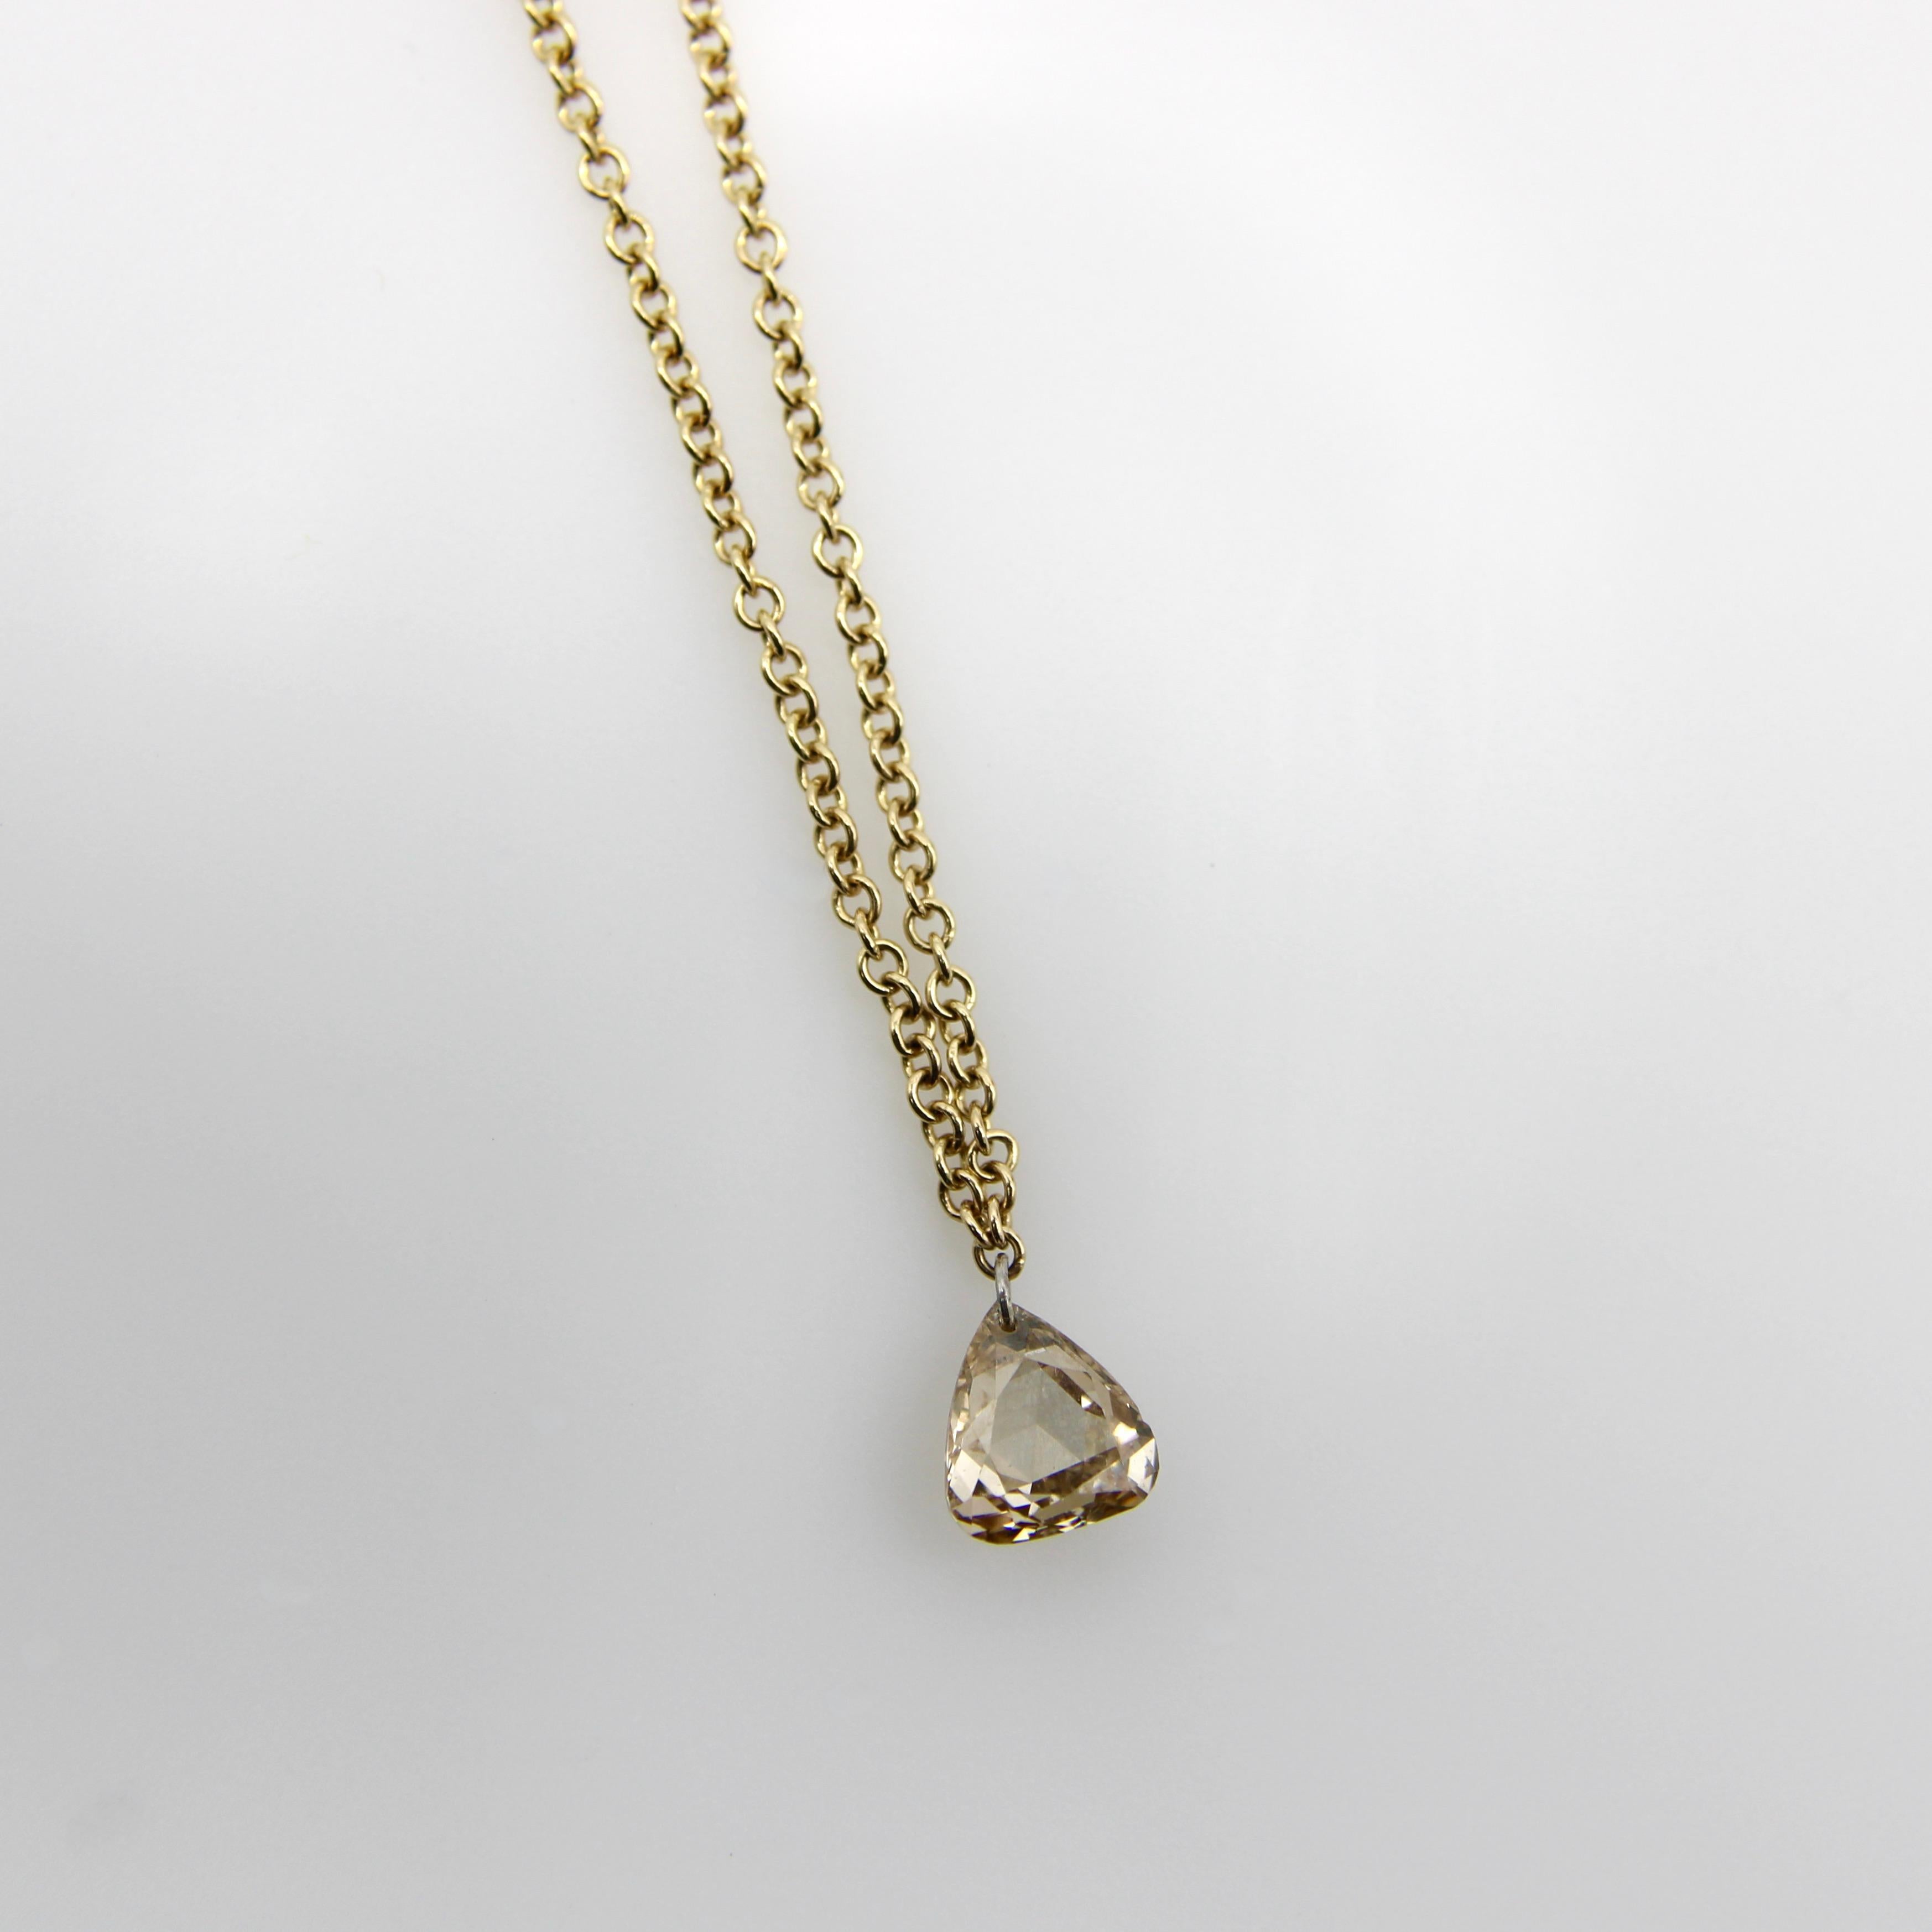 Dangling Pear Shape Champagne Rose Cut Diamond on 14K Gold Chain  In New Condition For Sale In Venice, CA